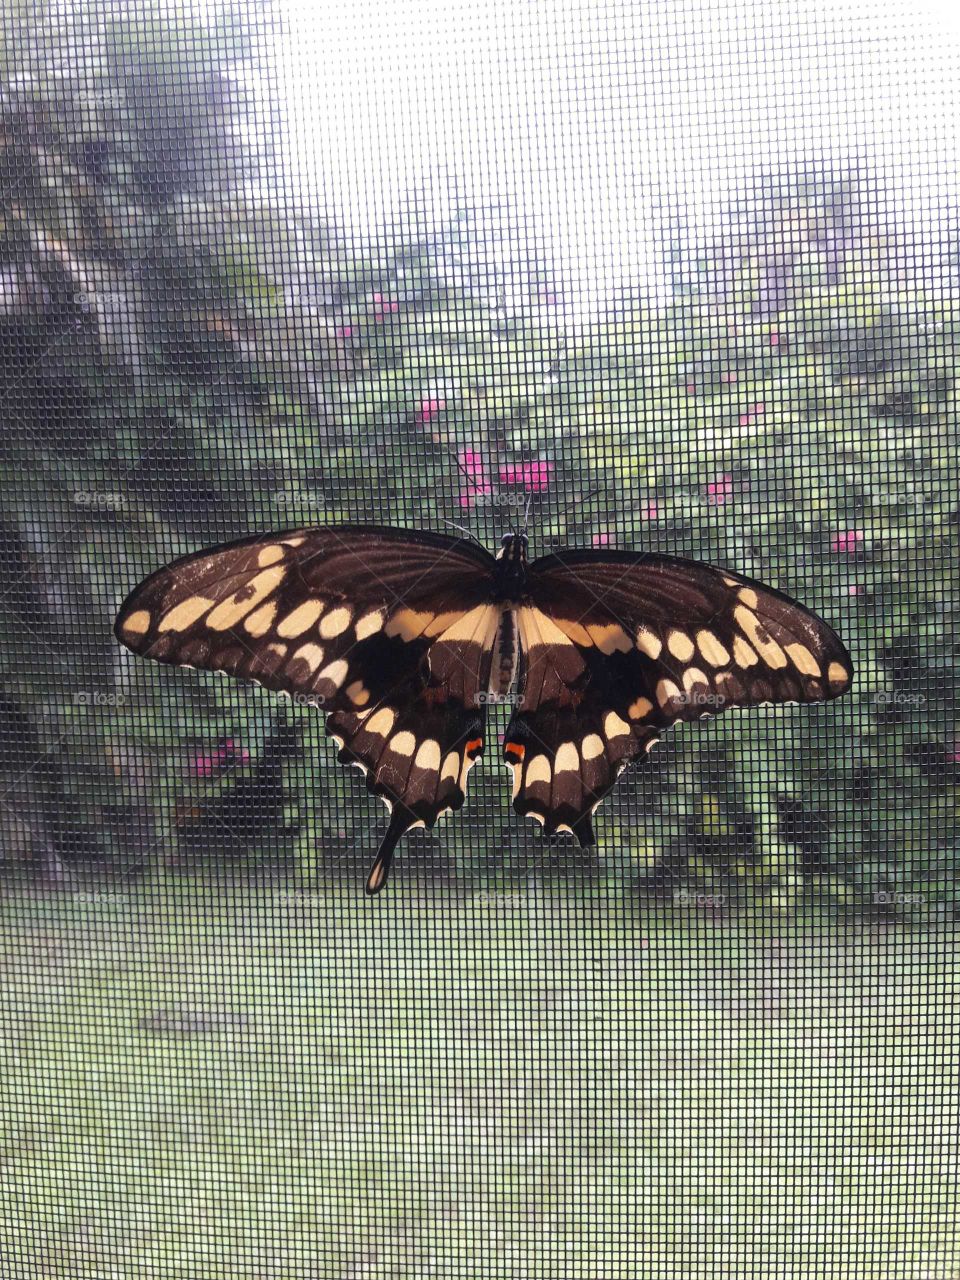 pretty butterfly came to visit